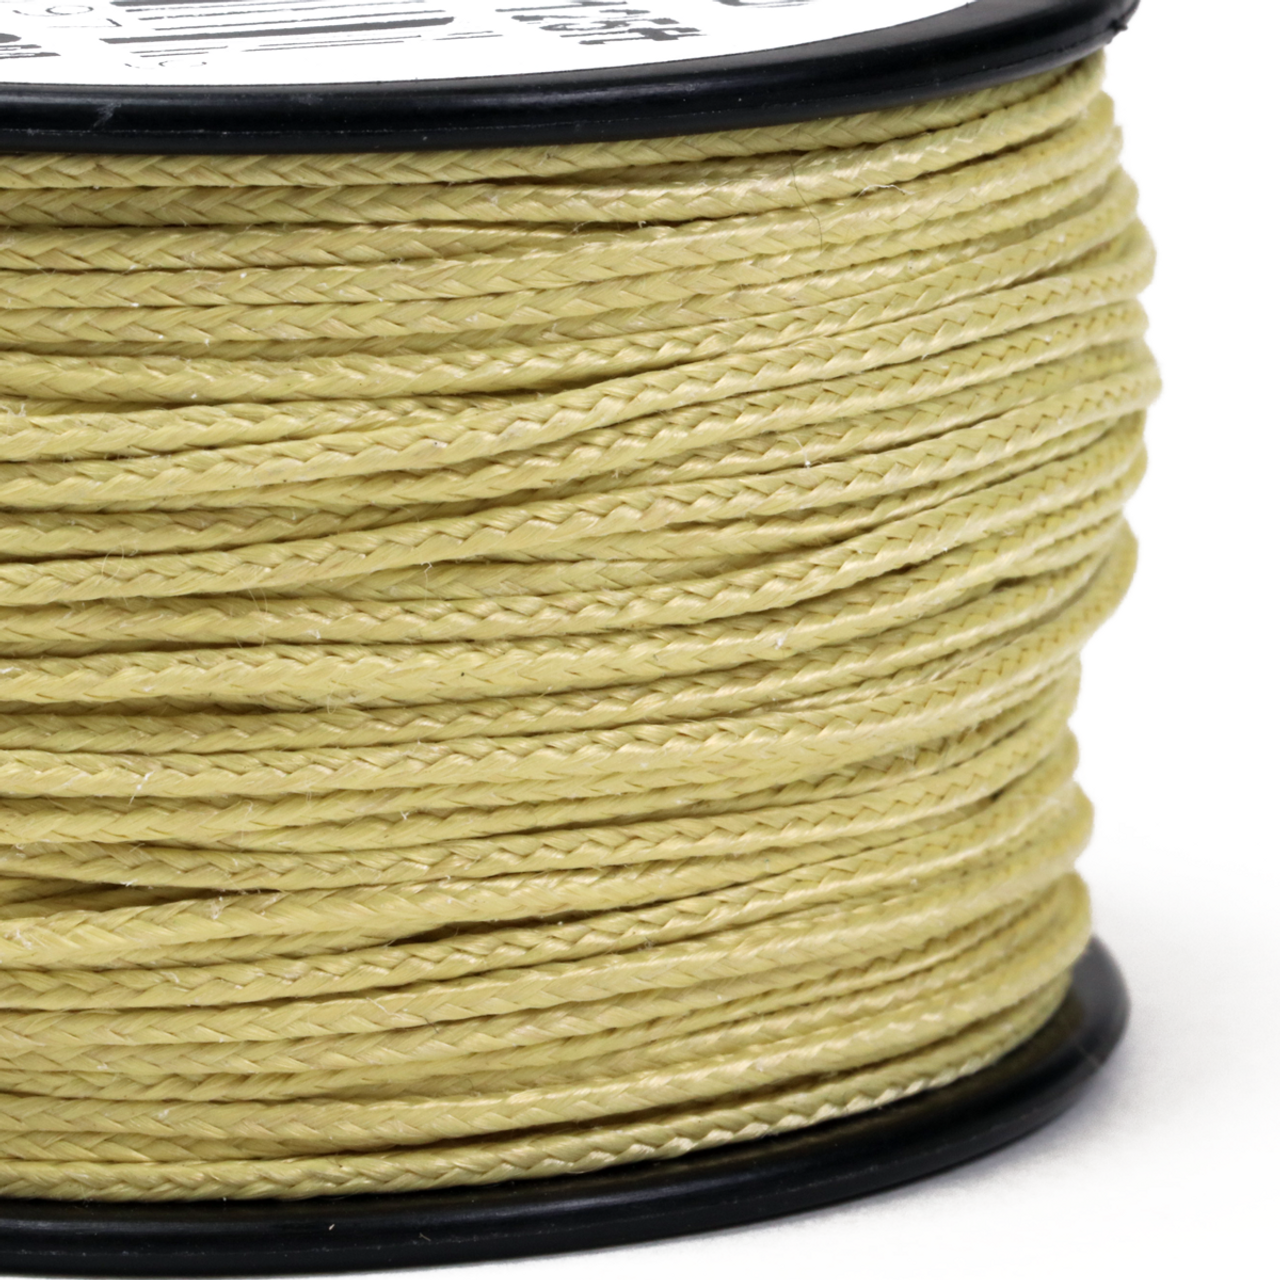 Atwood Rope Micro Cord Paracord 1.18mm (3/64) X 125ft Spool USA Made